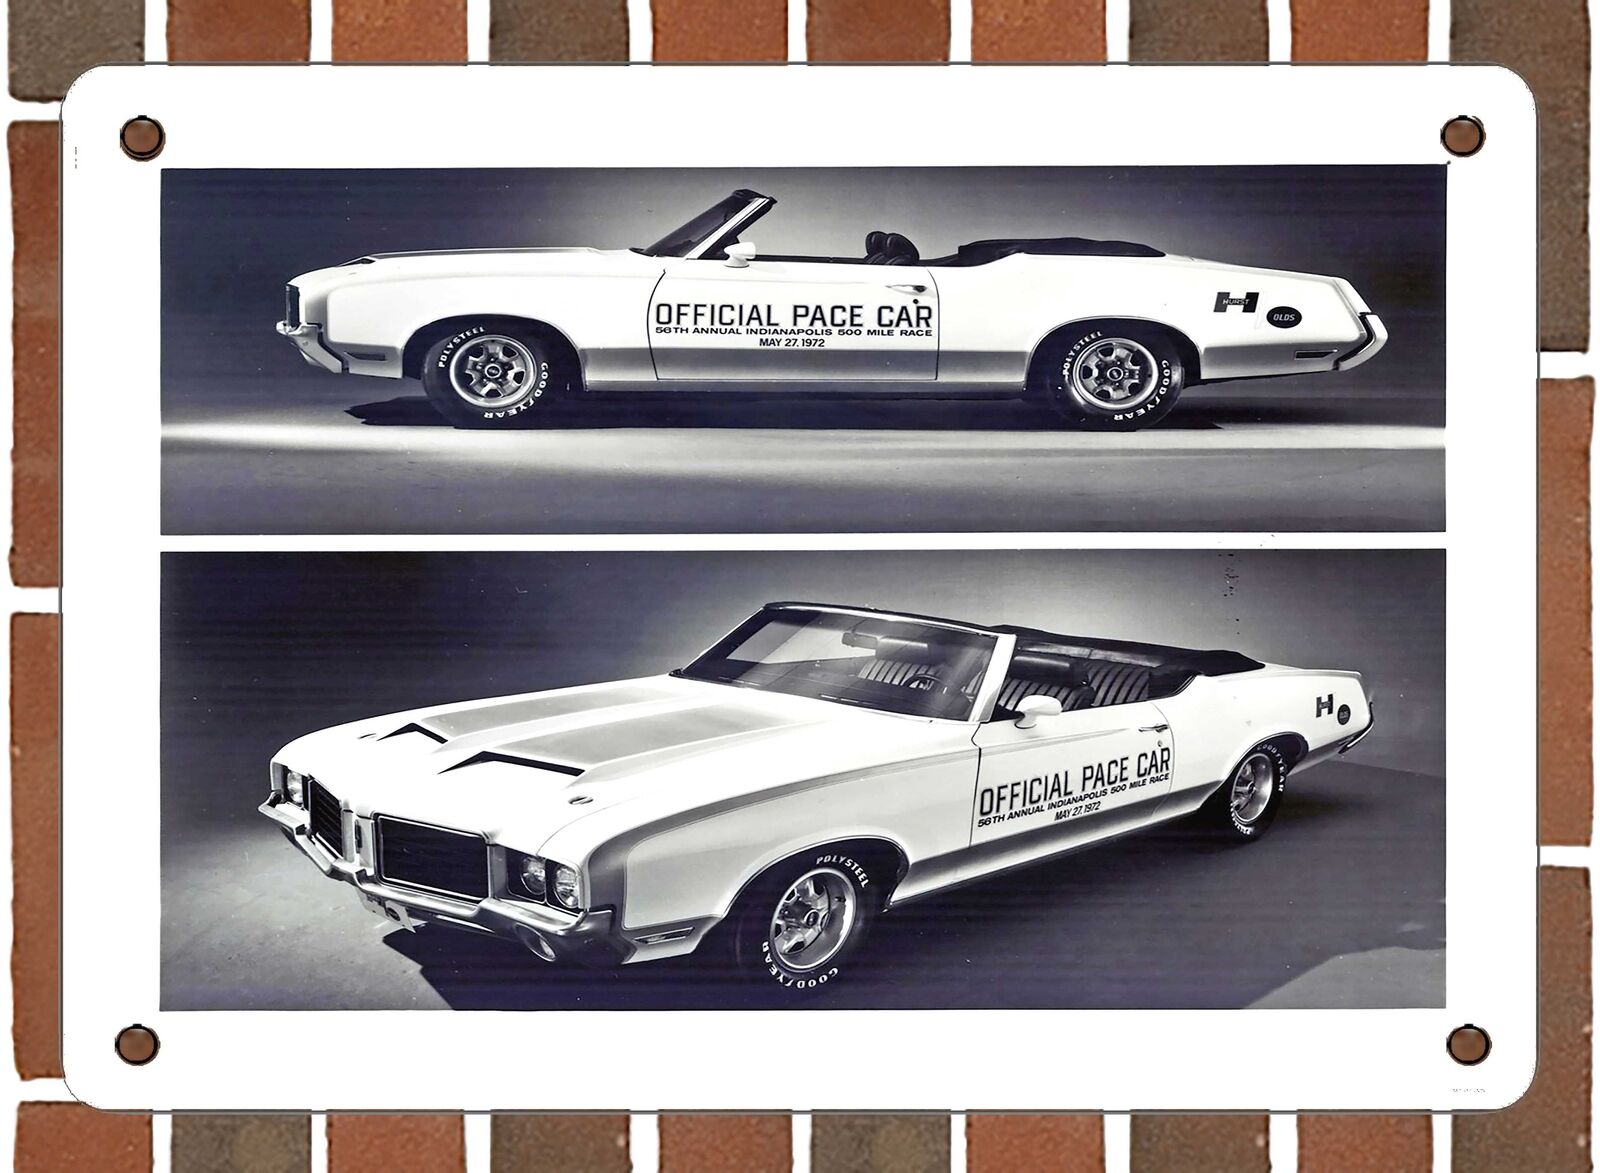 METAL SIGN - 1972 Oldsmobile Hurst-Olds Indy 500 Pace Car - 10x14 Inches